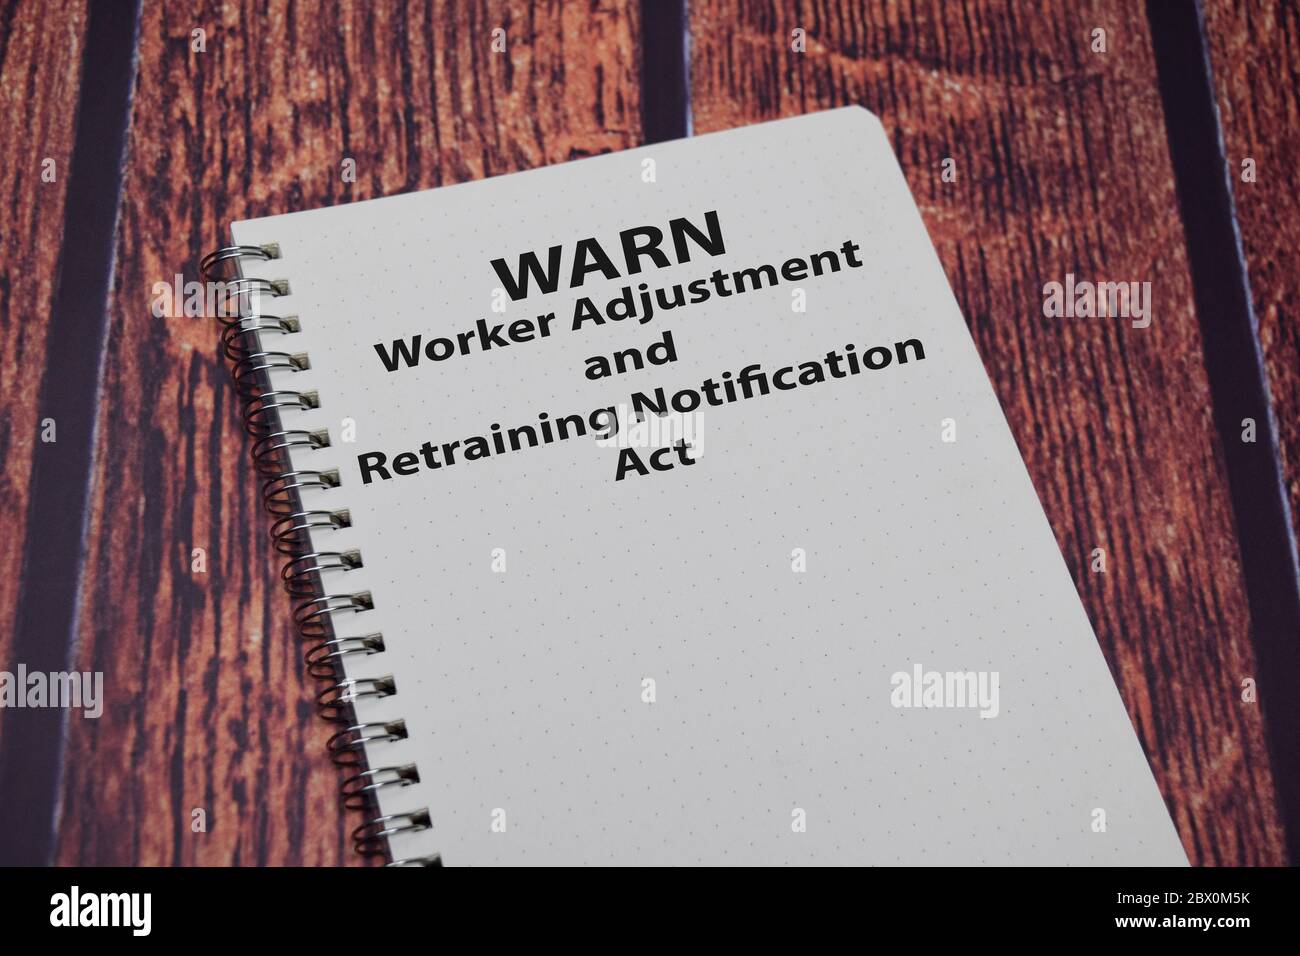 Book about WARN - Worker Adjustment & Retraining Notification Act isolated on wooden table. Stock Photo